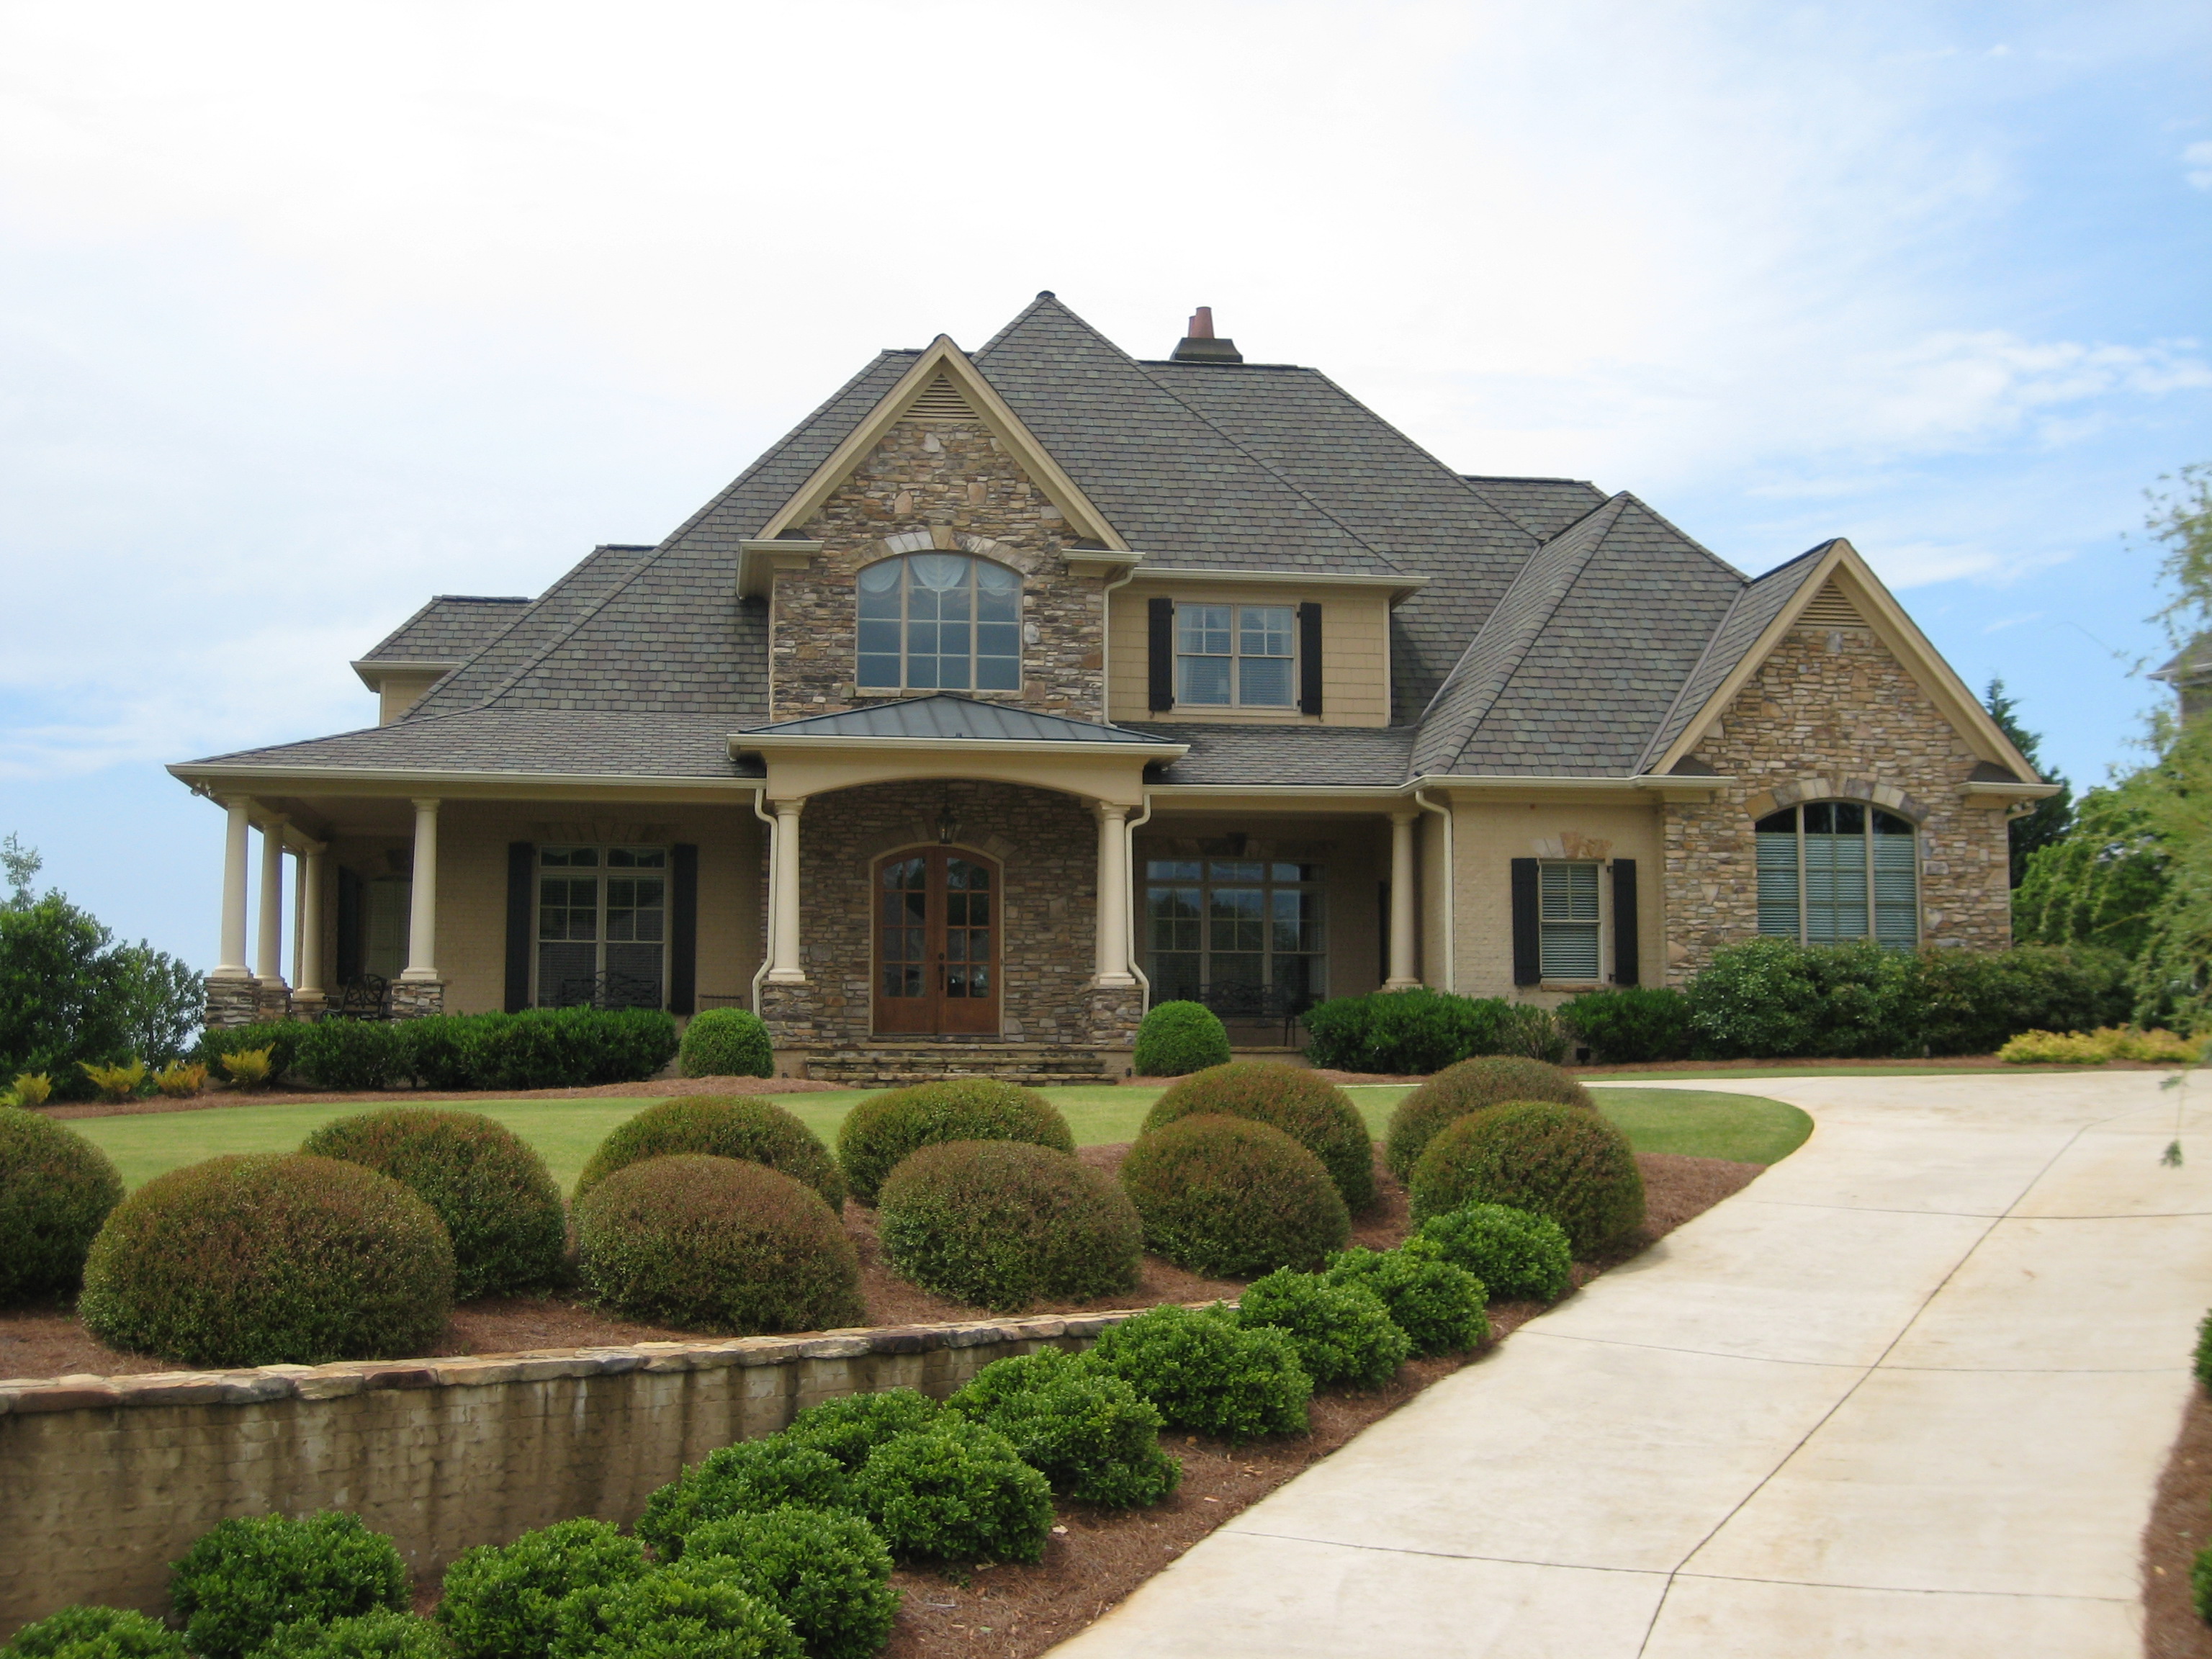 landscaping your new custom home